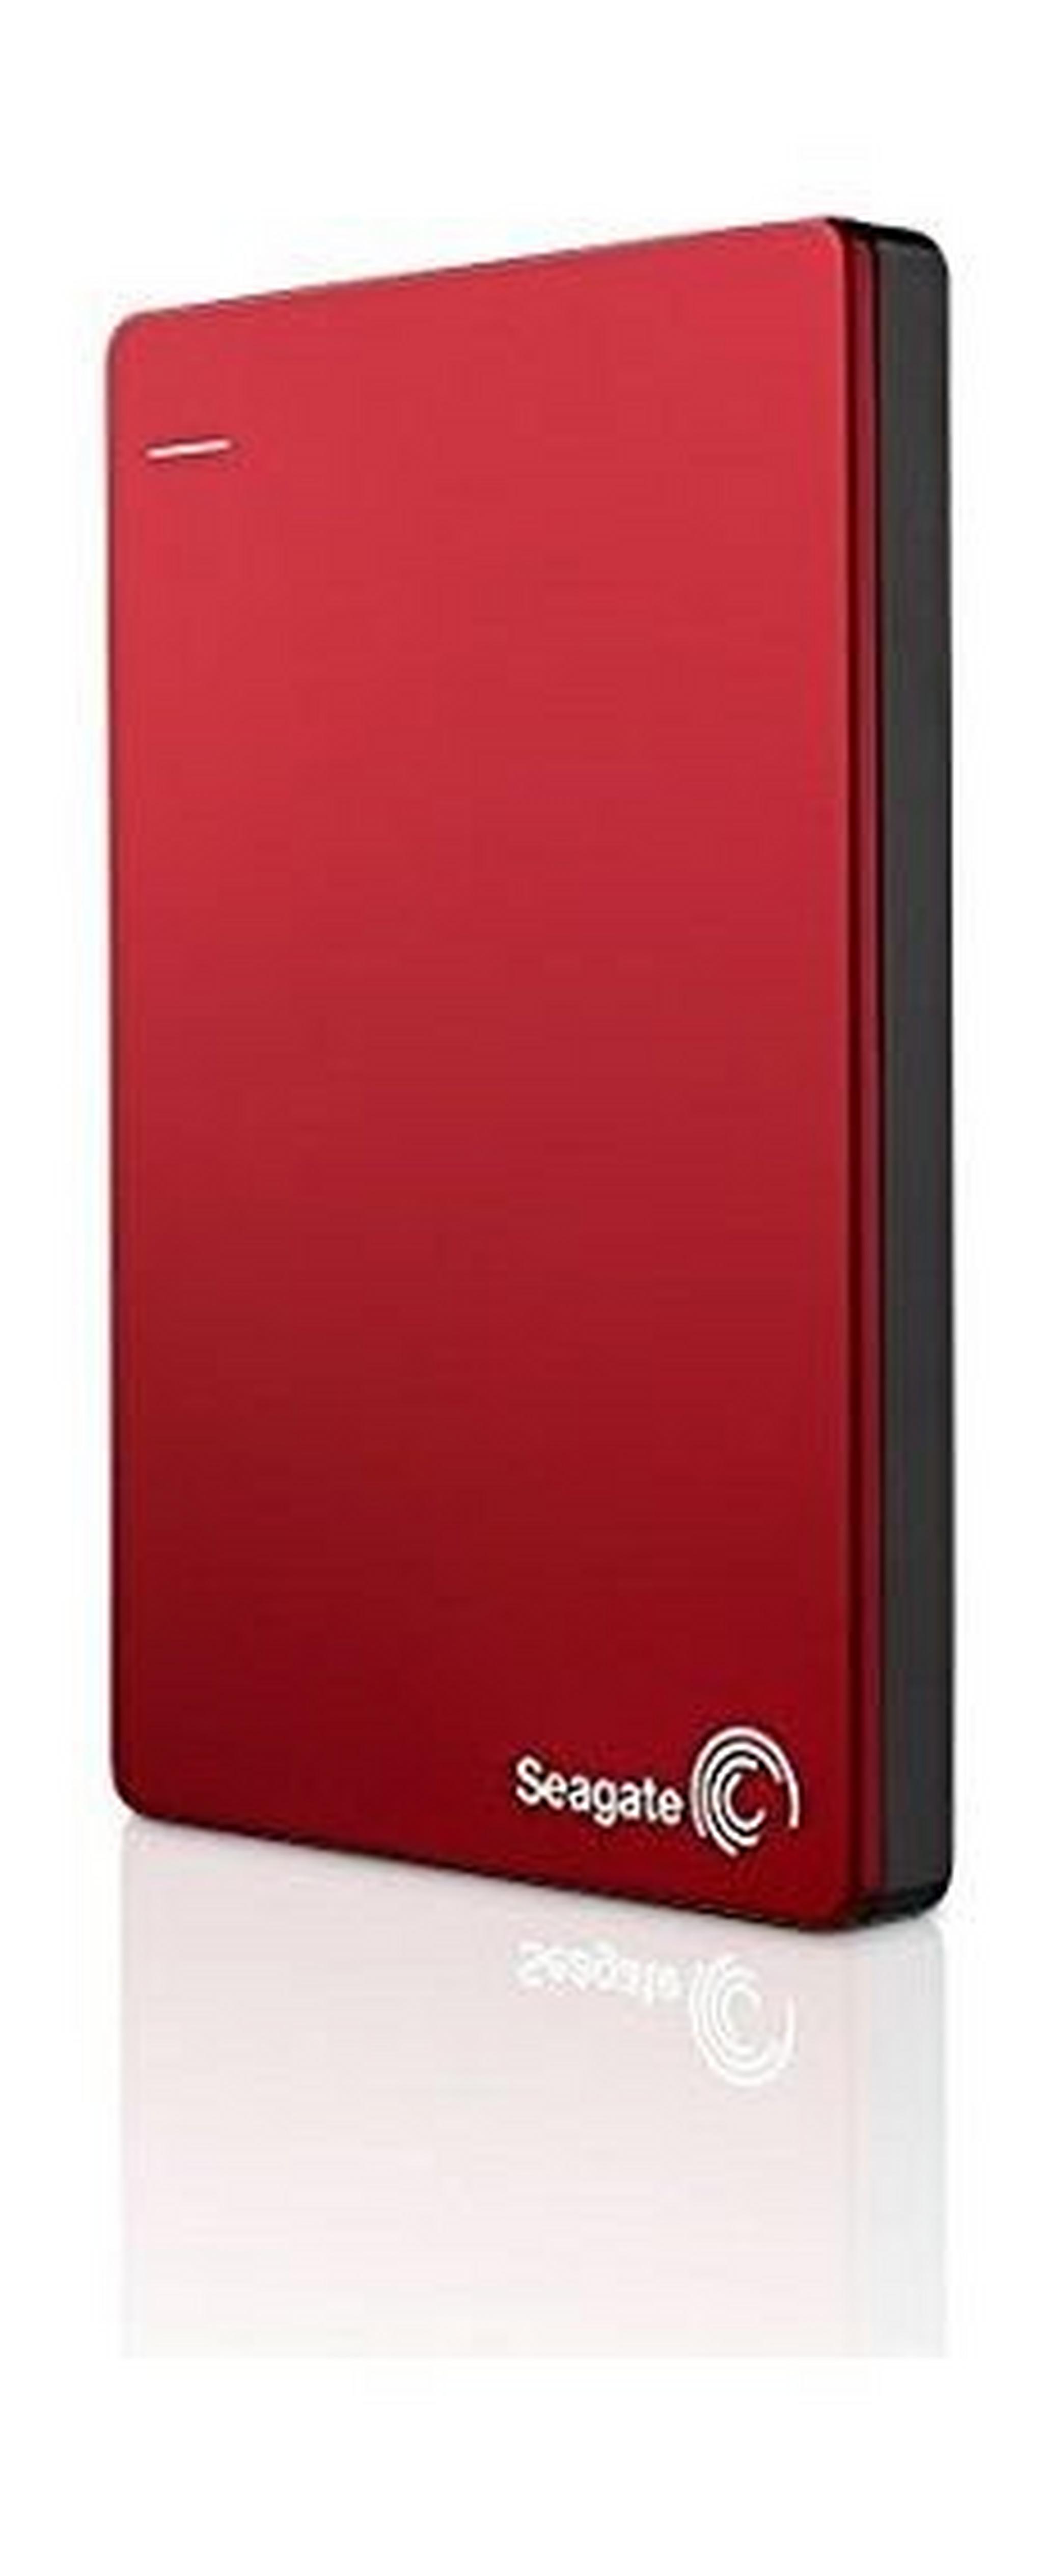 Seagate Back Up Plus 1TB Portable Hard Drive (STDR1000203) – Red